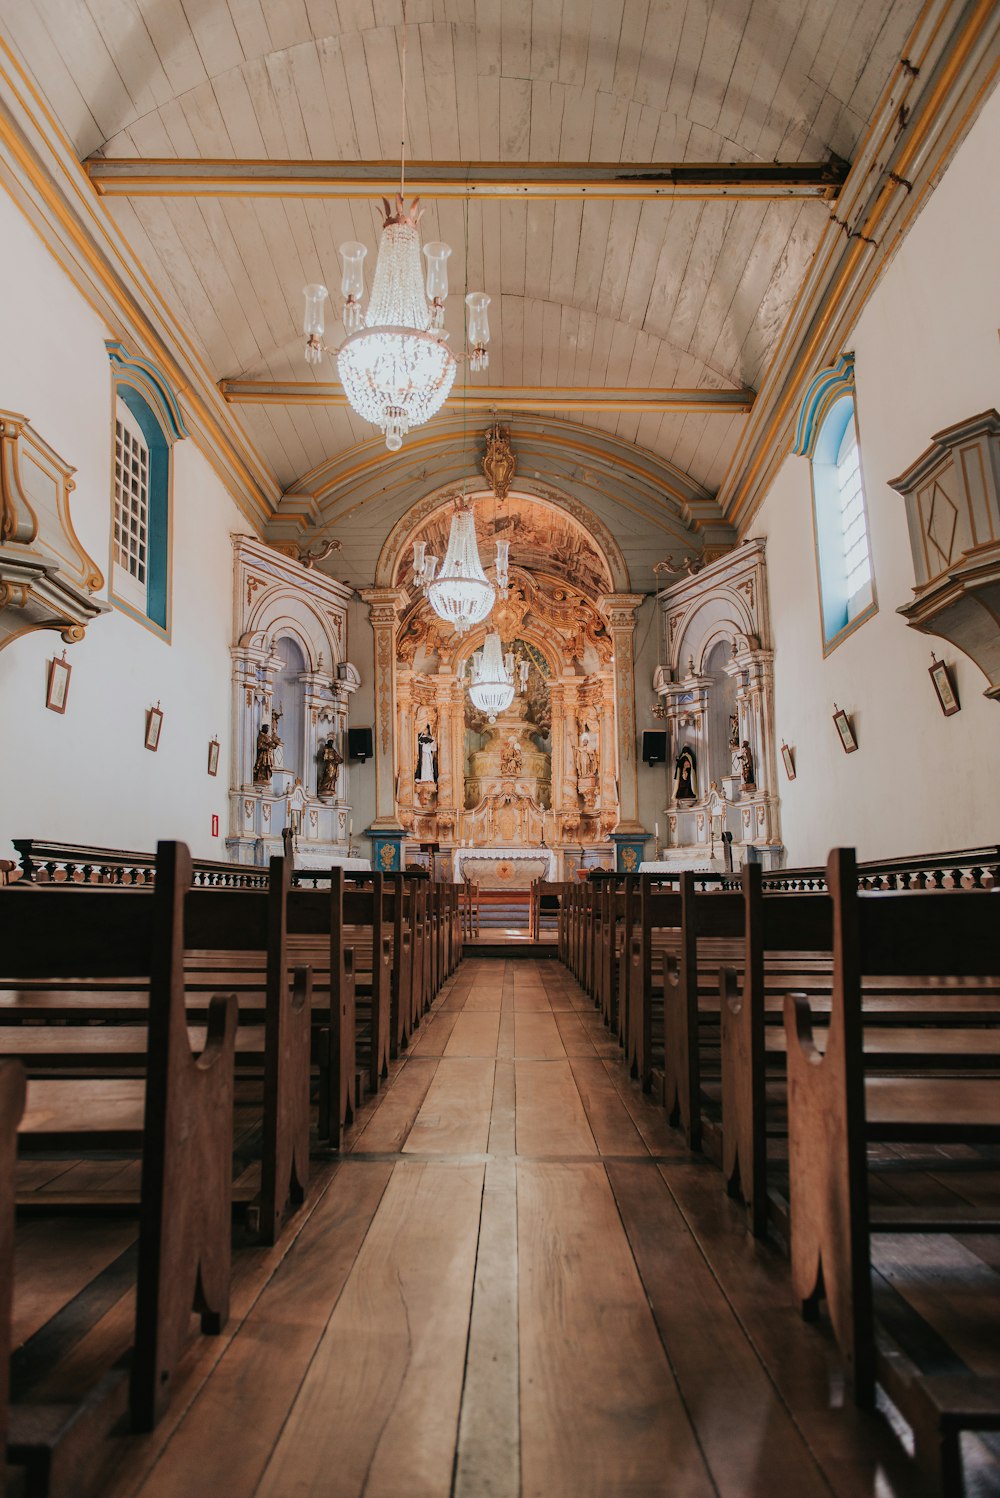 the inside of a church with pews and chandeliers